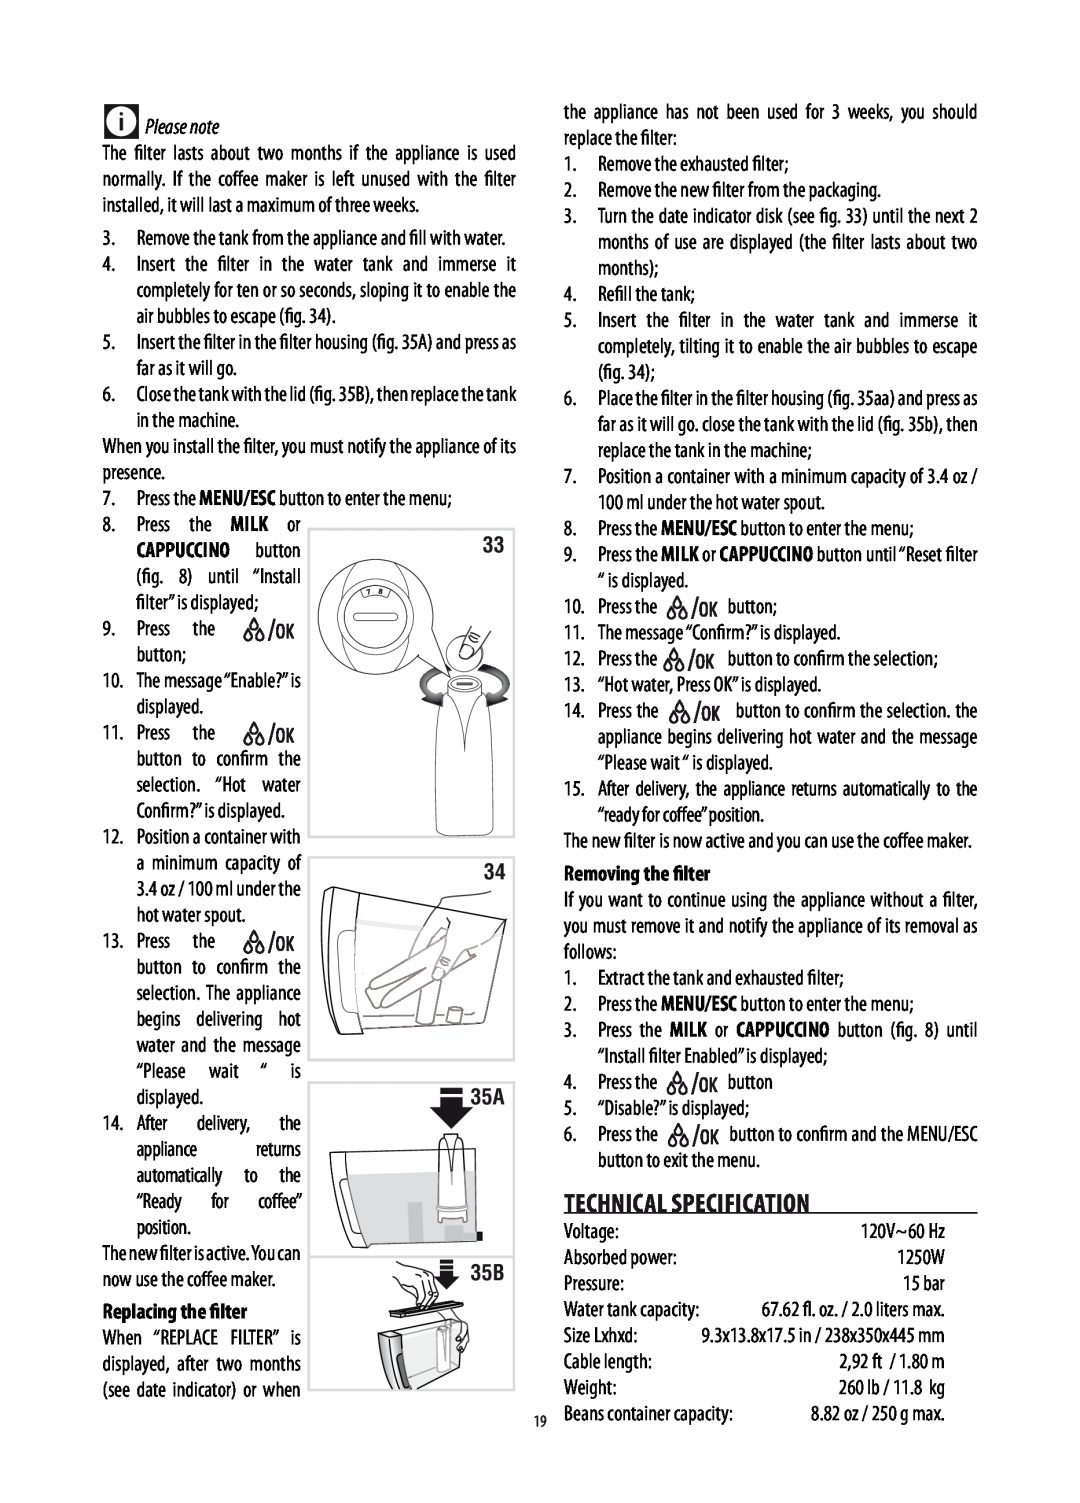 DeLonghi ECAM26455M manual Technical Specification, Please note, Removing the filter 